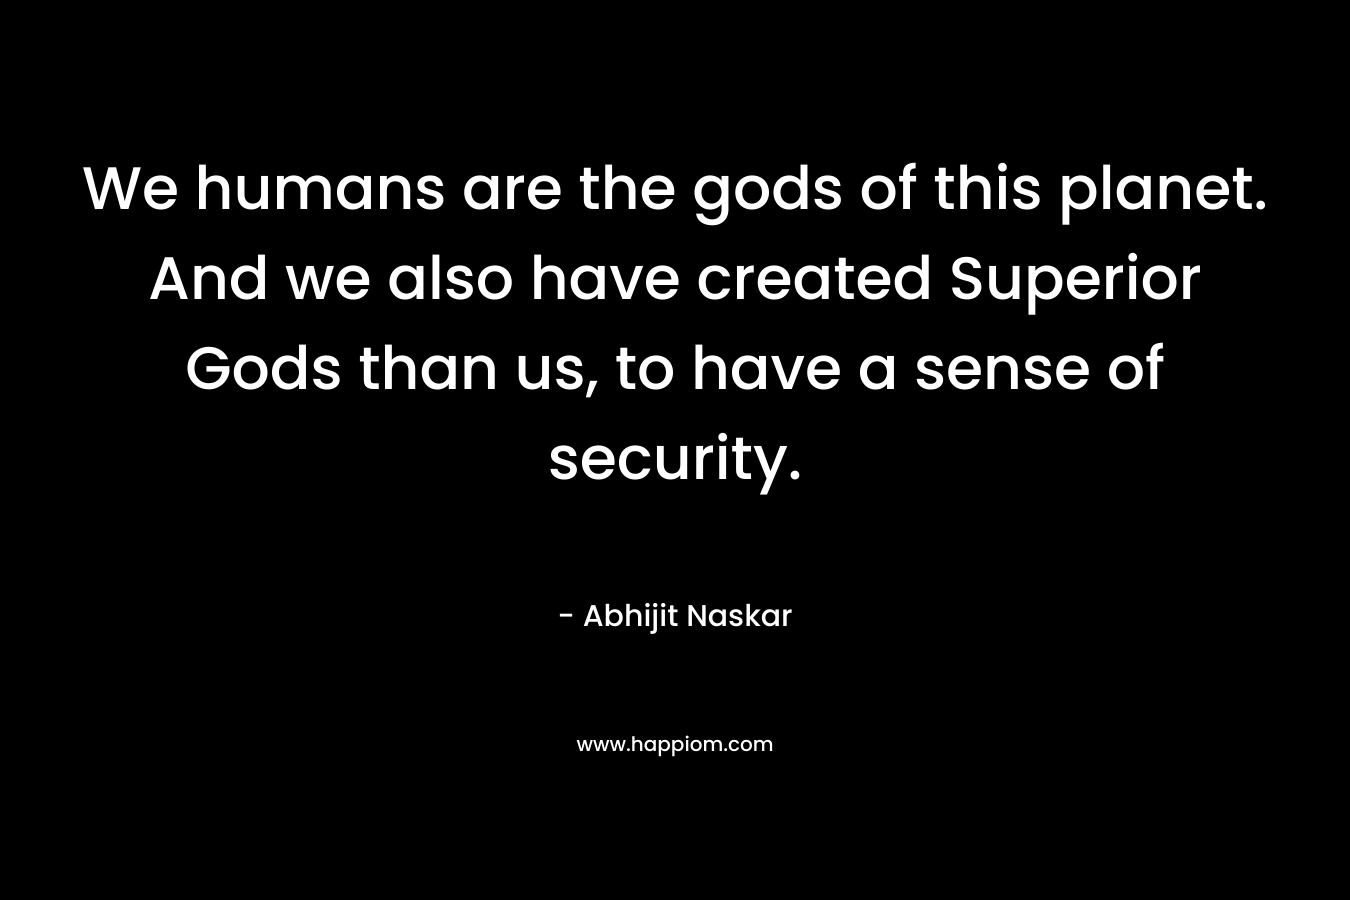 We humans are the gods of this planet. And we also have created Superior Gods than us, to have a sense of security.